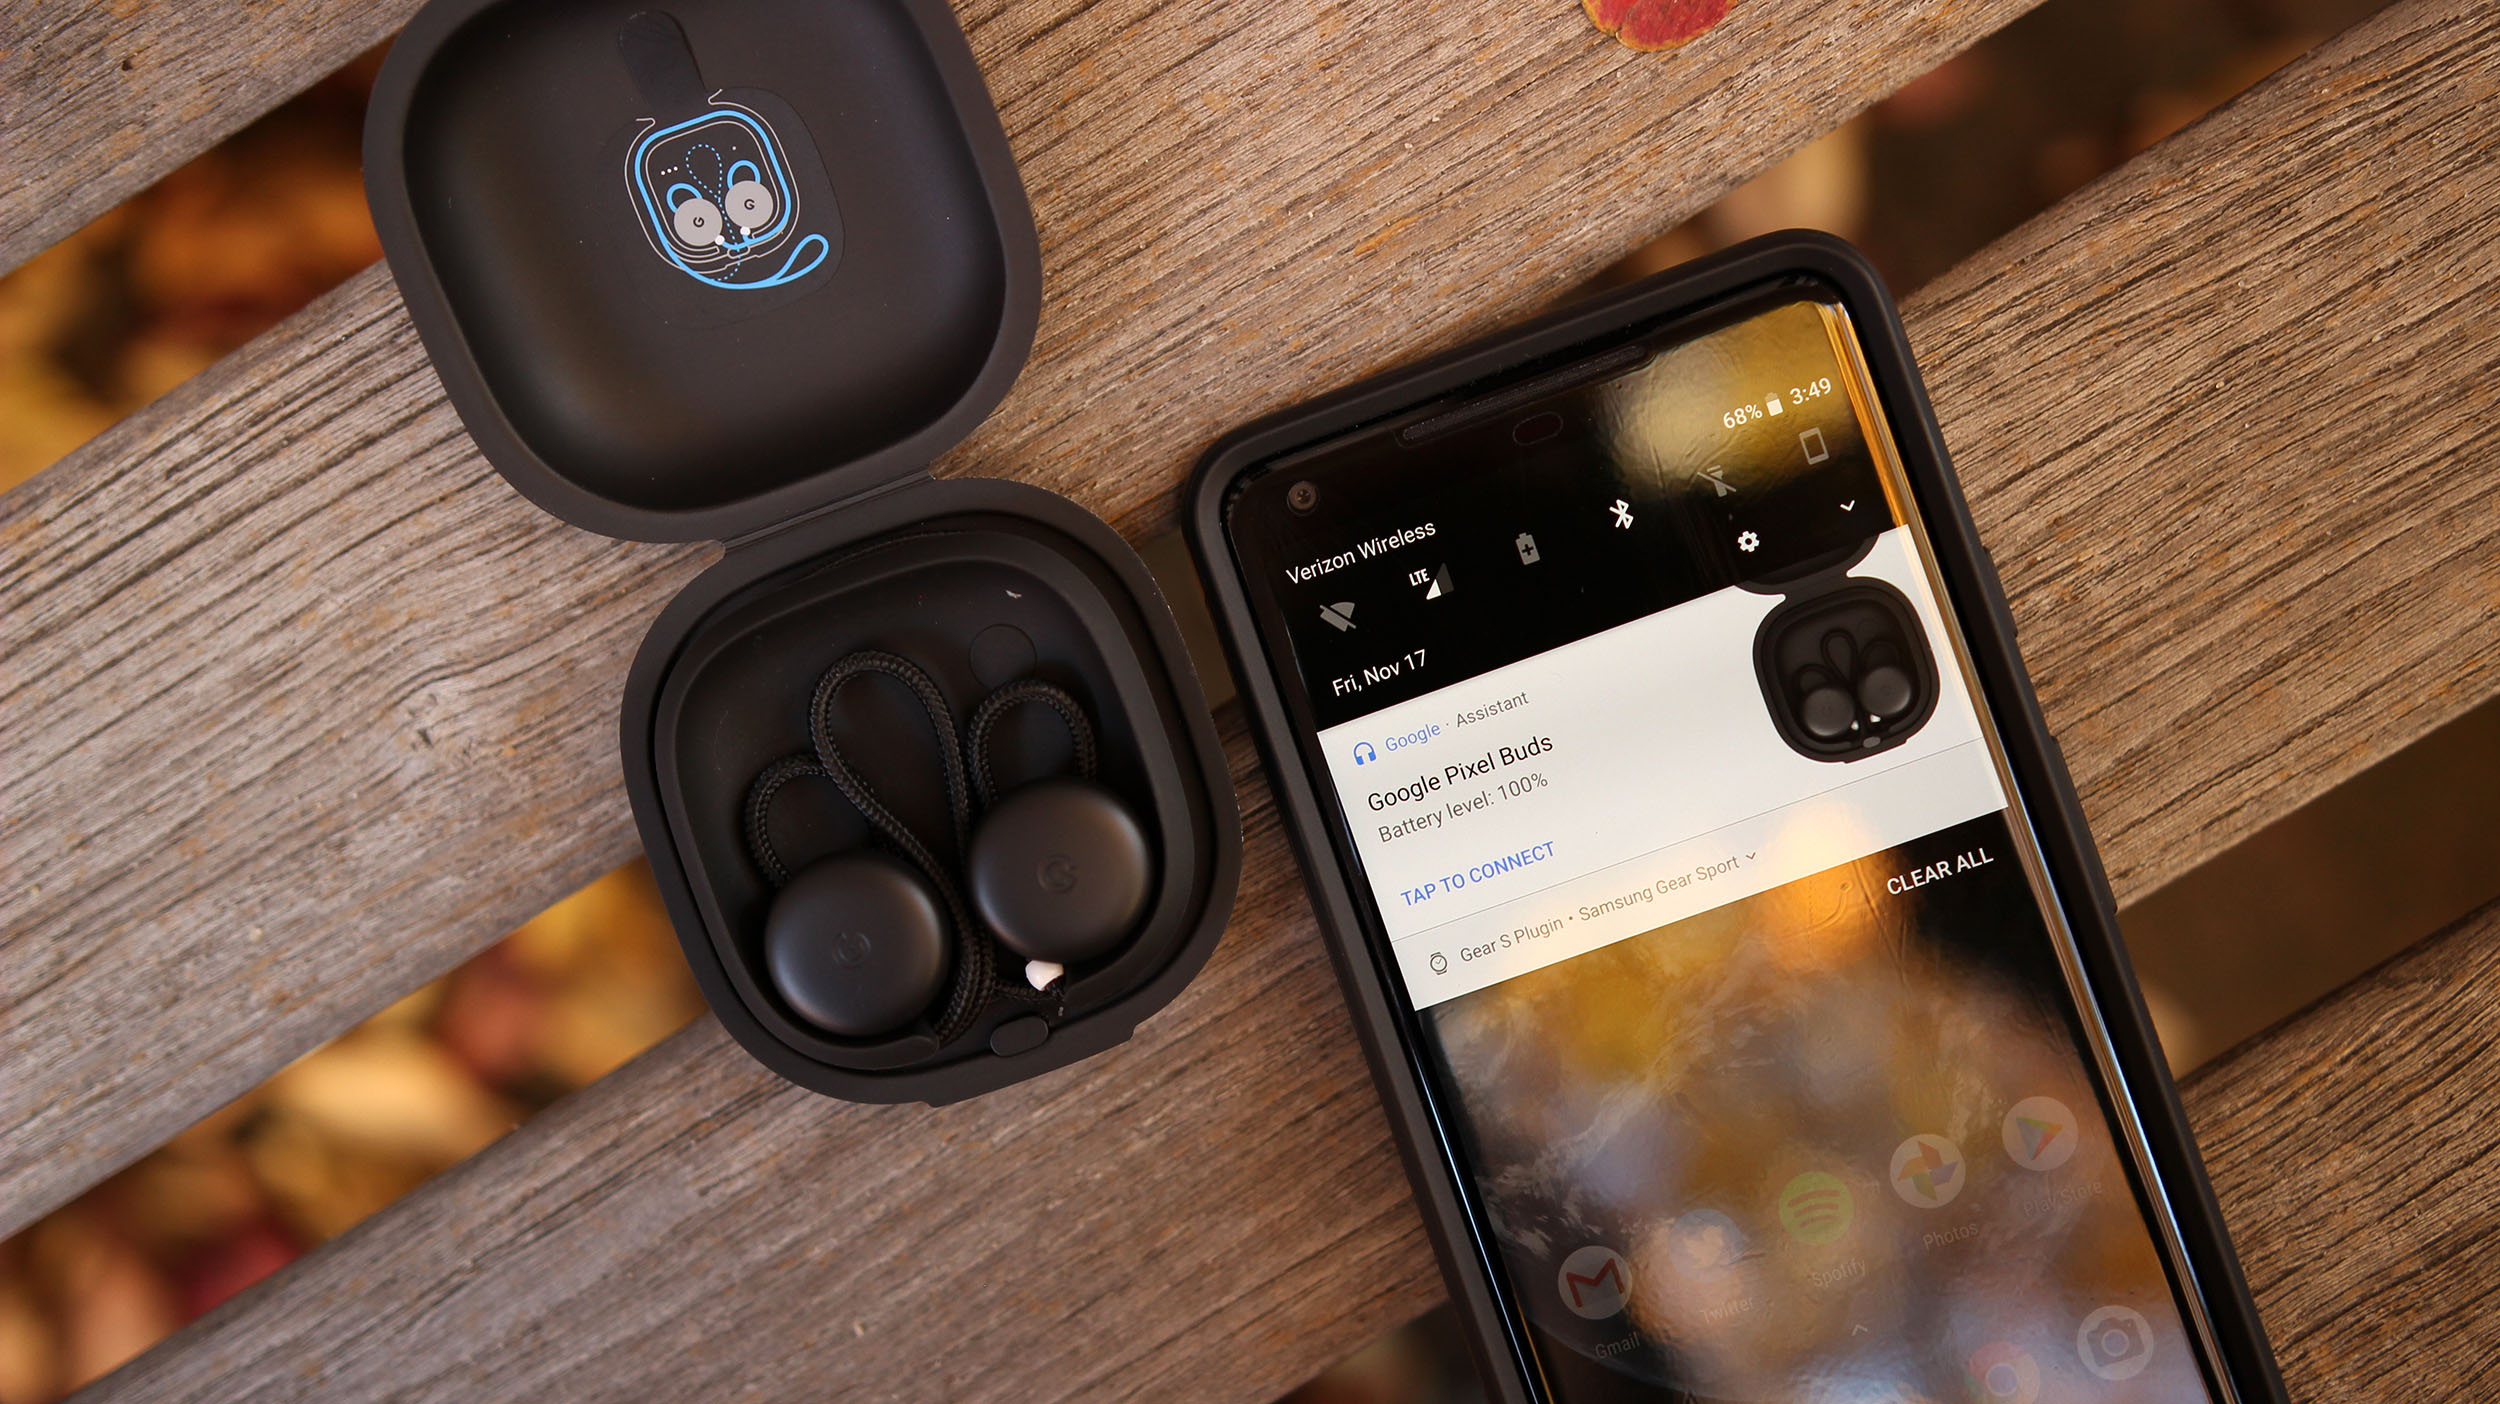 Fast Pair now syncs Bluetooth accessories across Android devices, Chromebook support in 2019 - 9to5Google